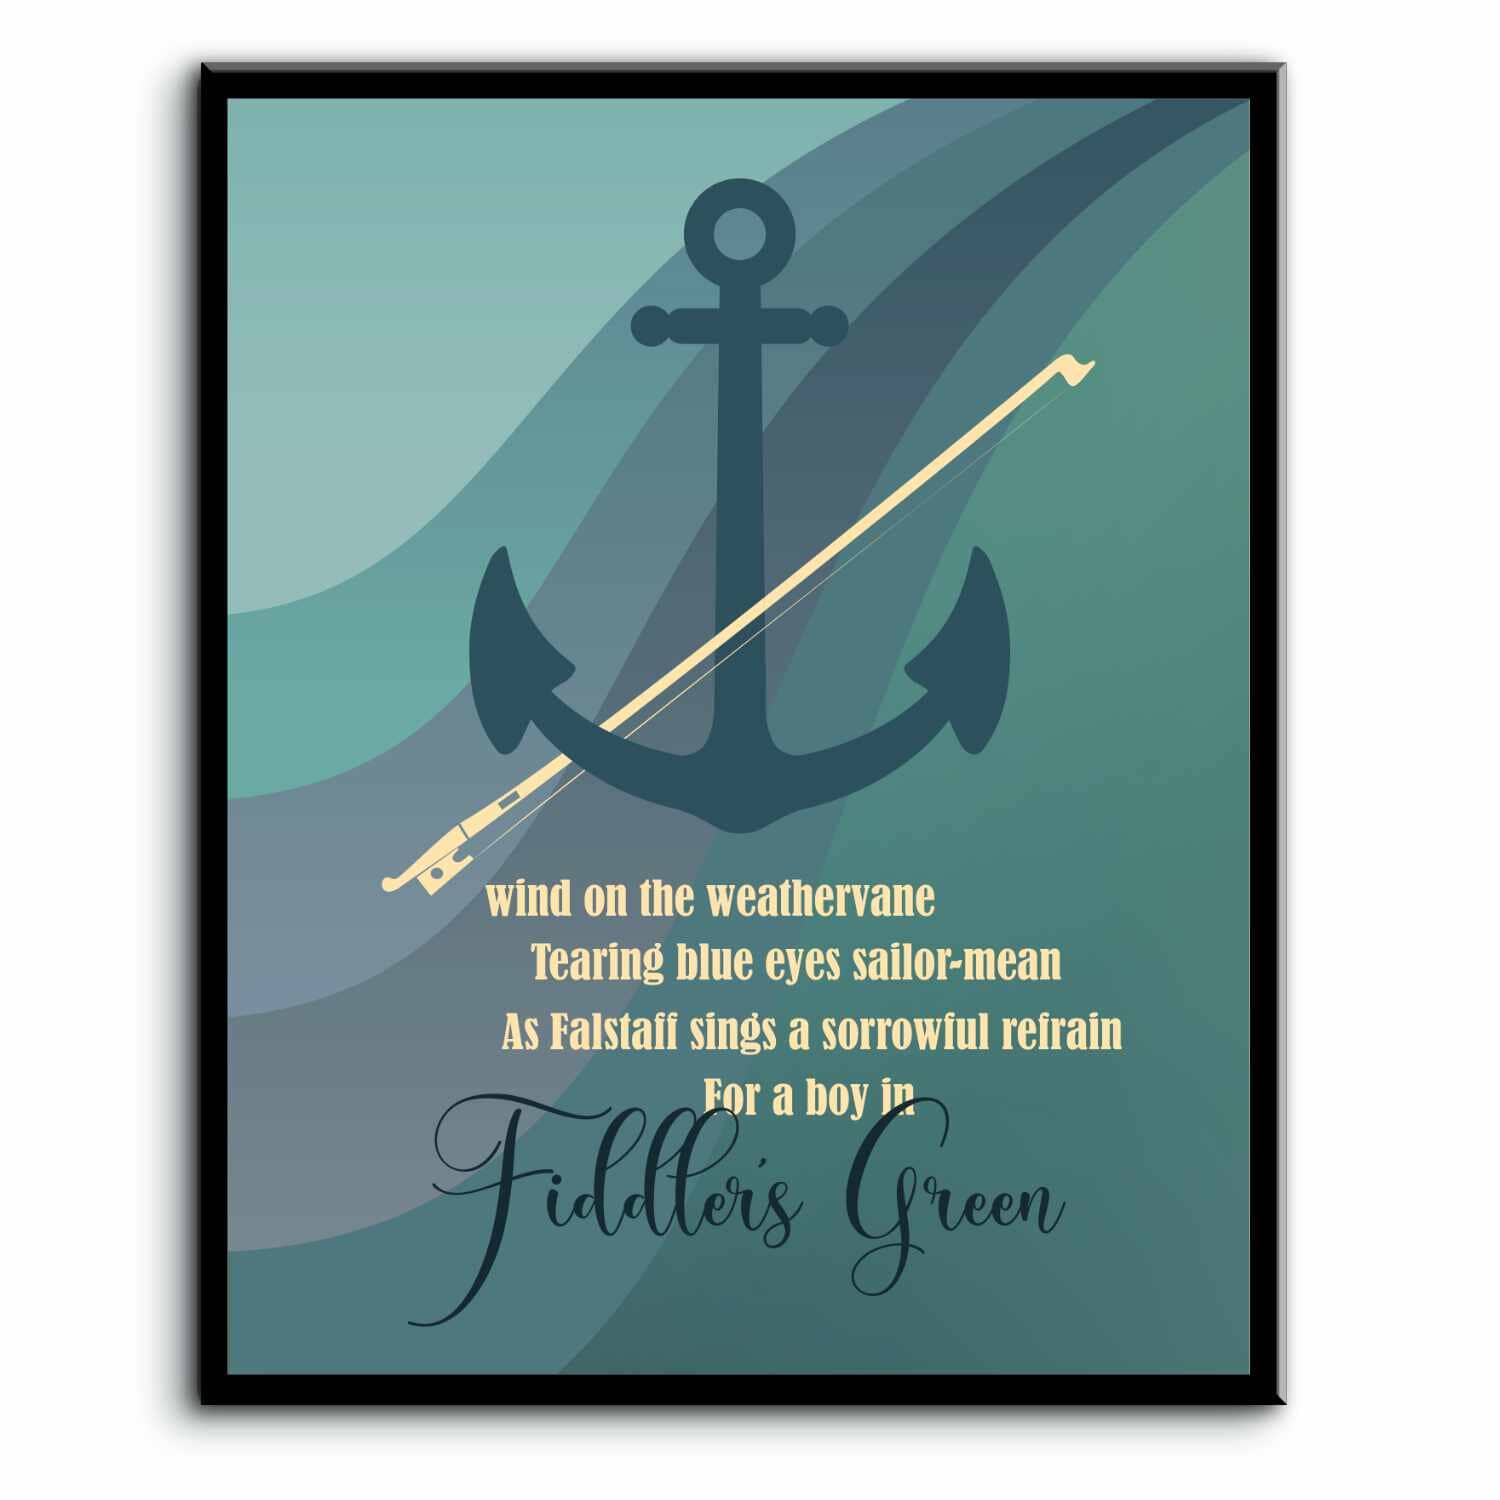 Fiddlers Green by Tragically Hip - Song Lyric Music Wall Art Song Lyrics Art Song Lyrics Art 8x10 Plaque Mount 